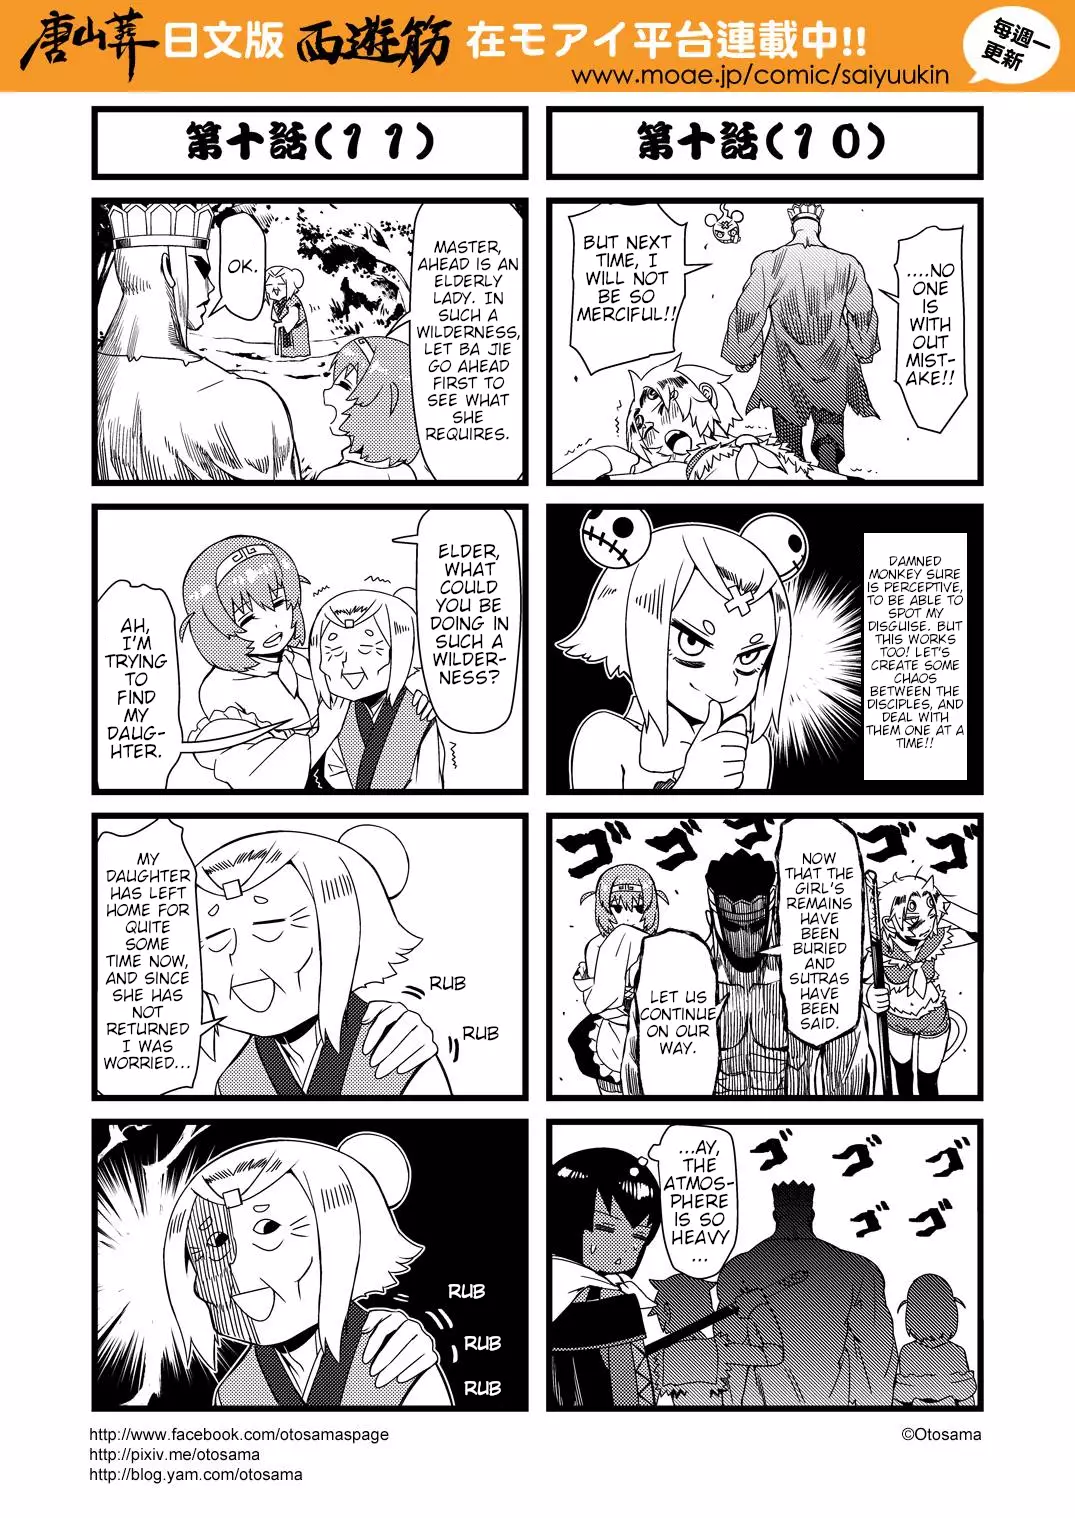 Tang Hill Burial - Journey To The West Irresponsible Anything Goes Edition - 10 page 6